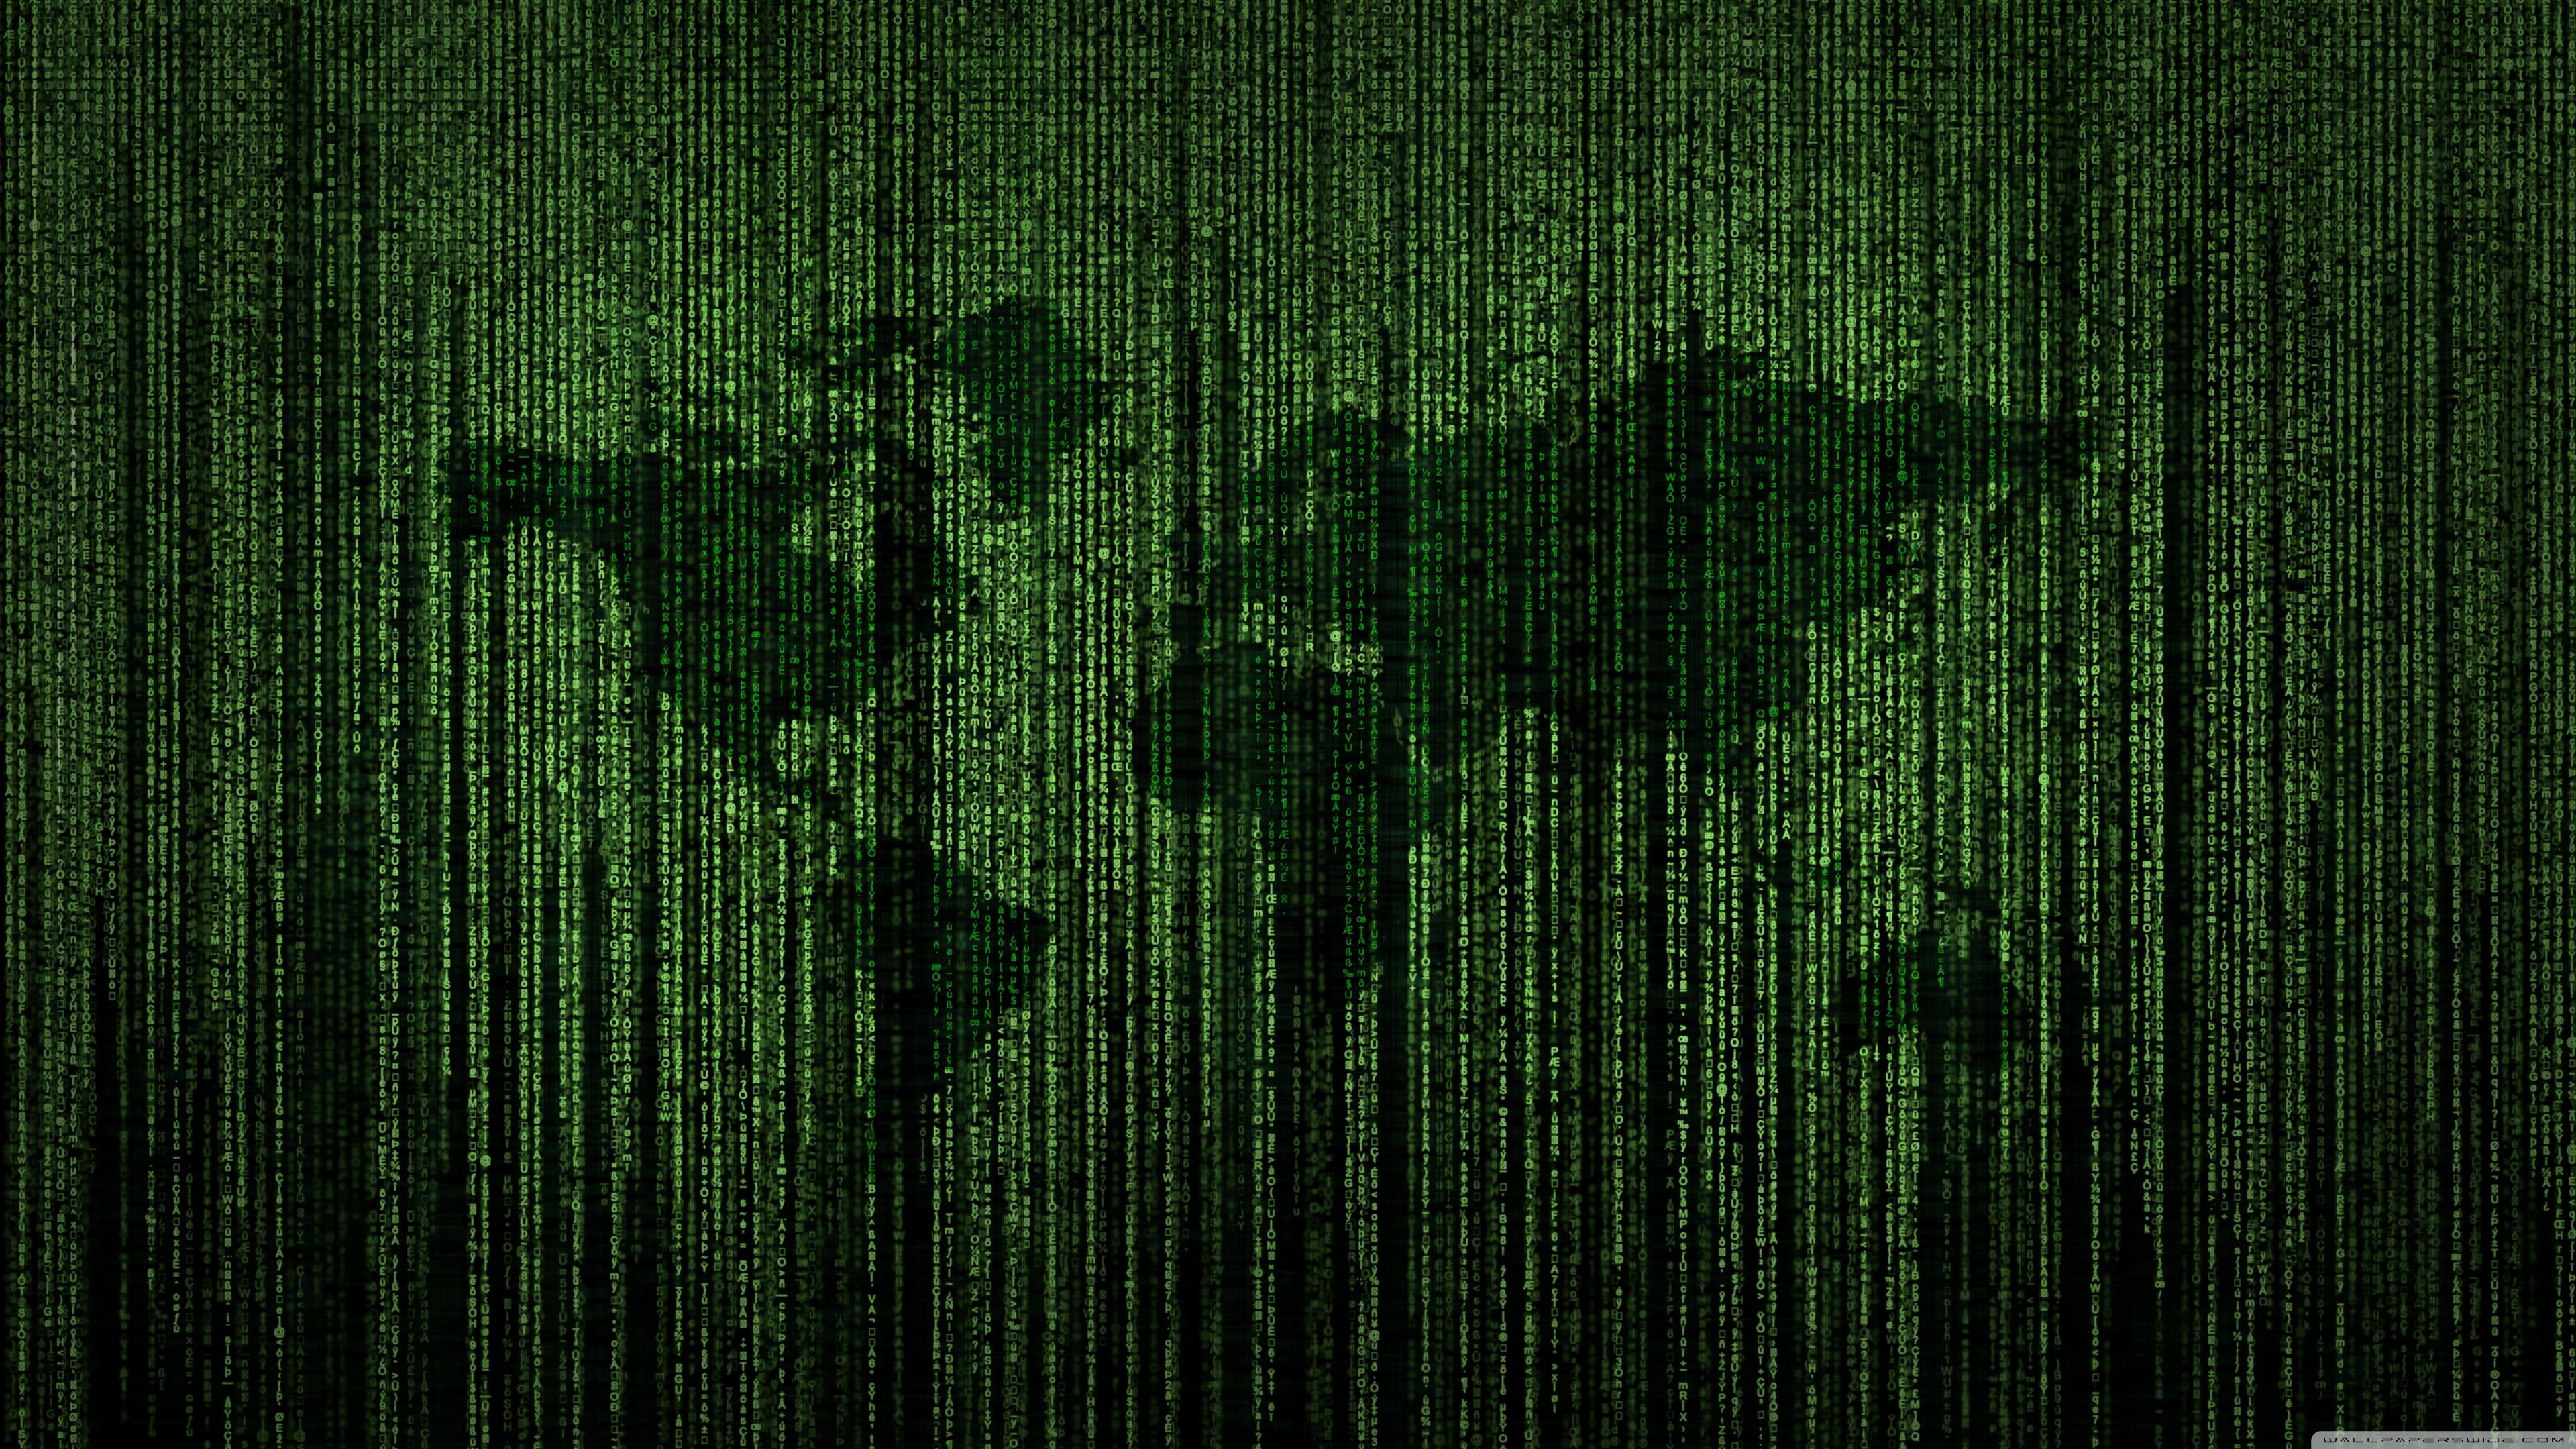 Cyber Green Wallpapers